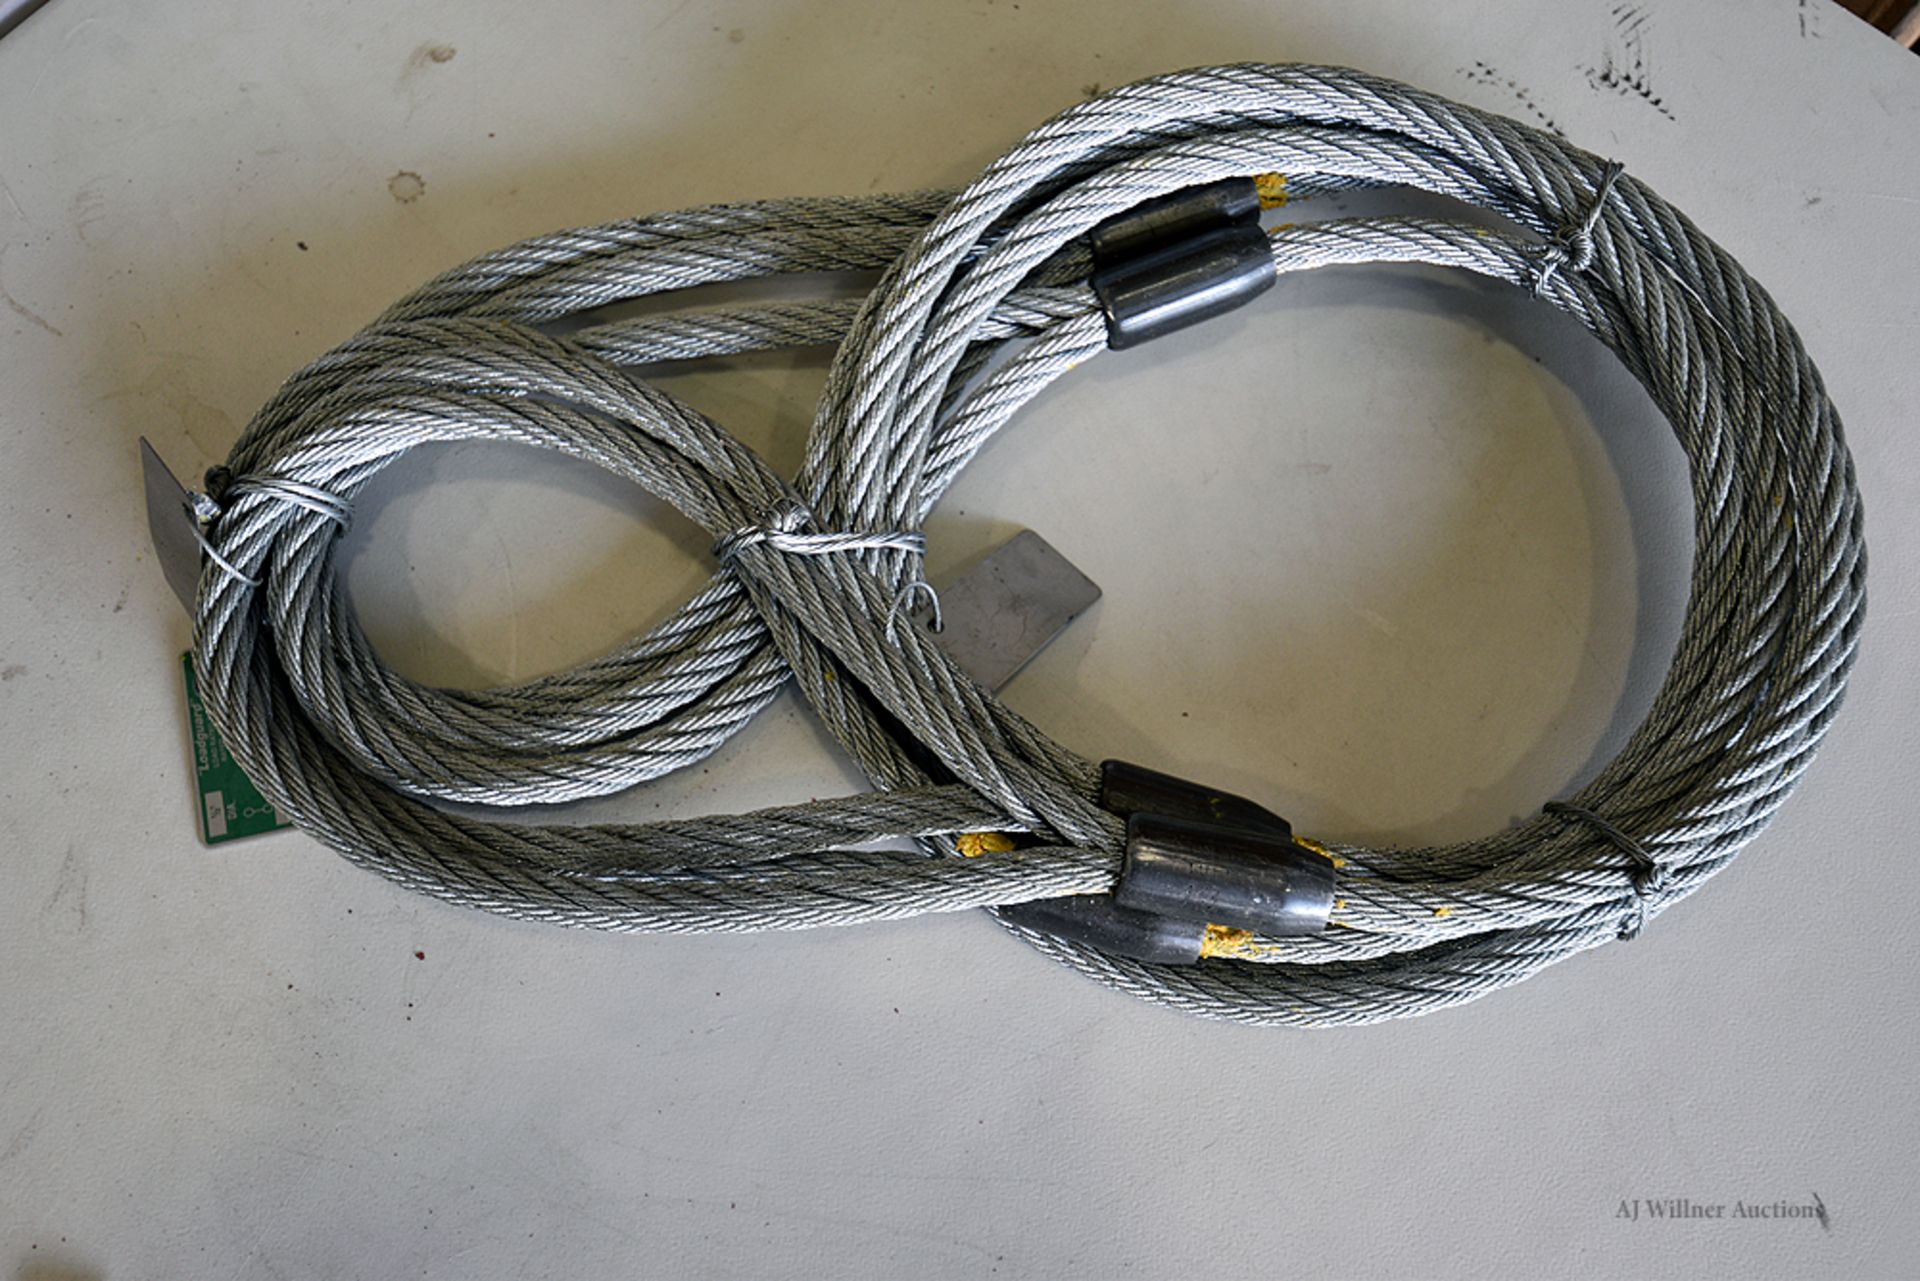 Johnson Capacity Hoist, Binders and Braided Cable Slings - Image 4 of 6